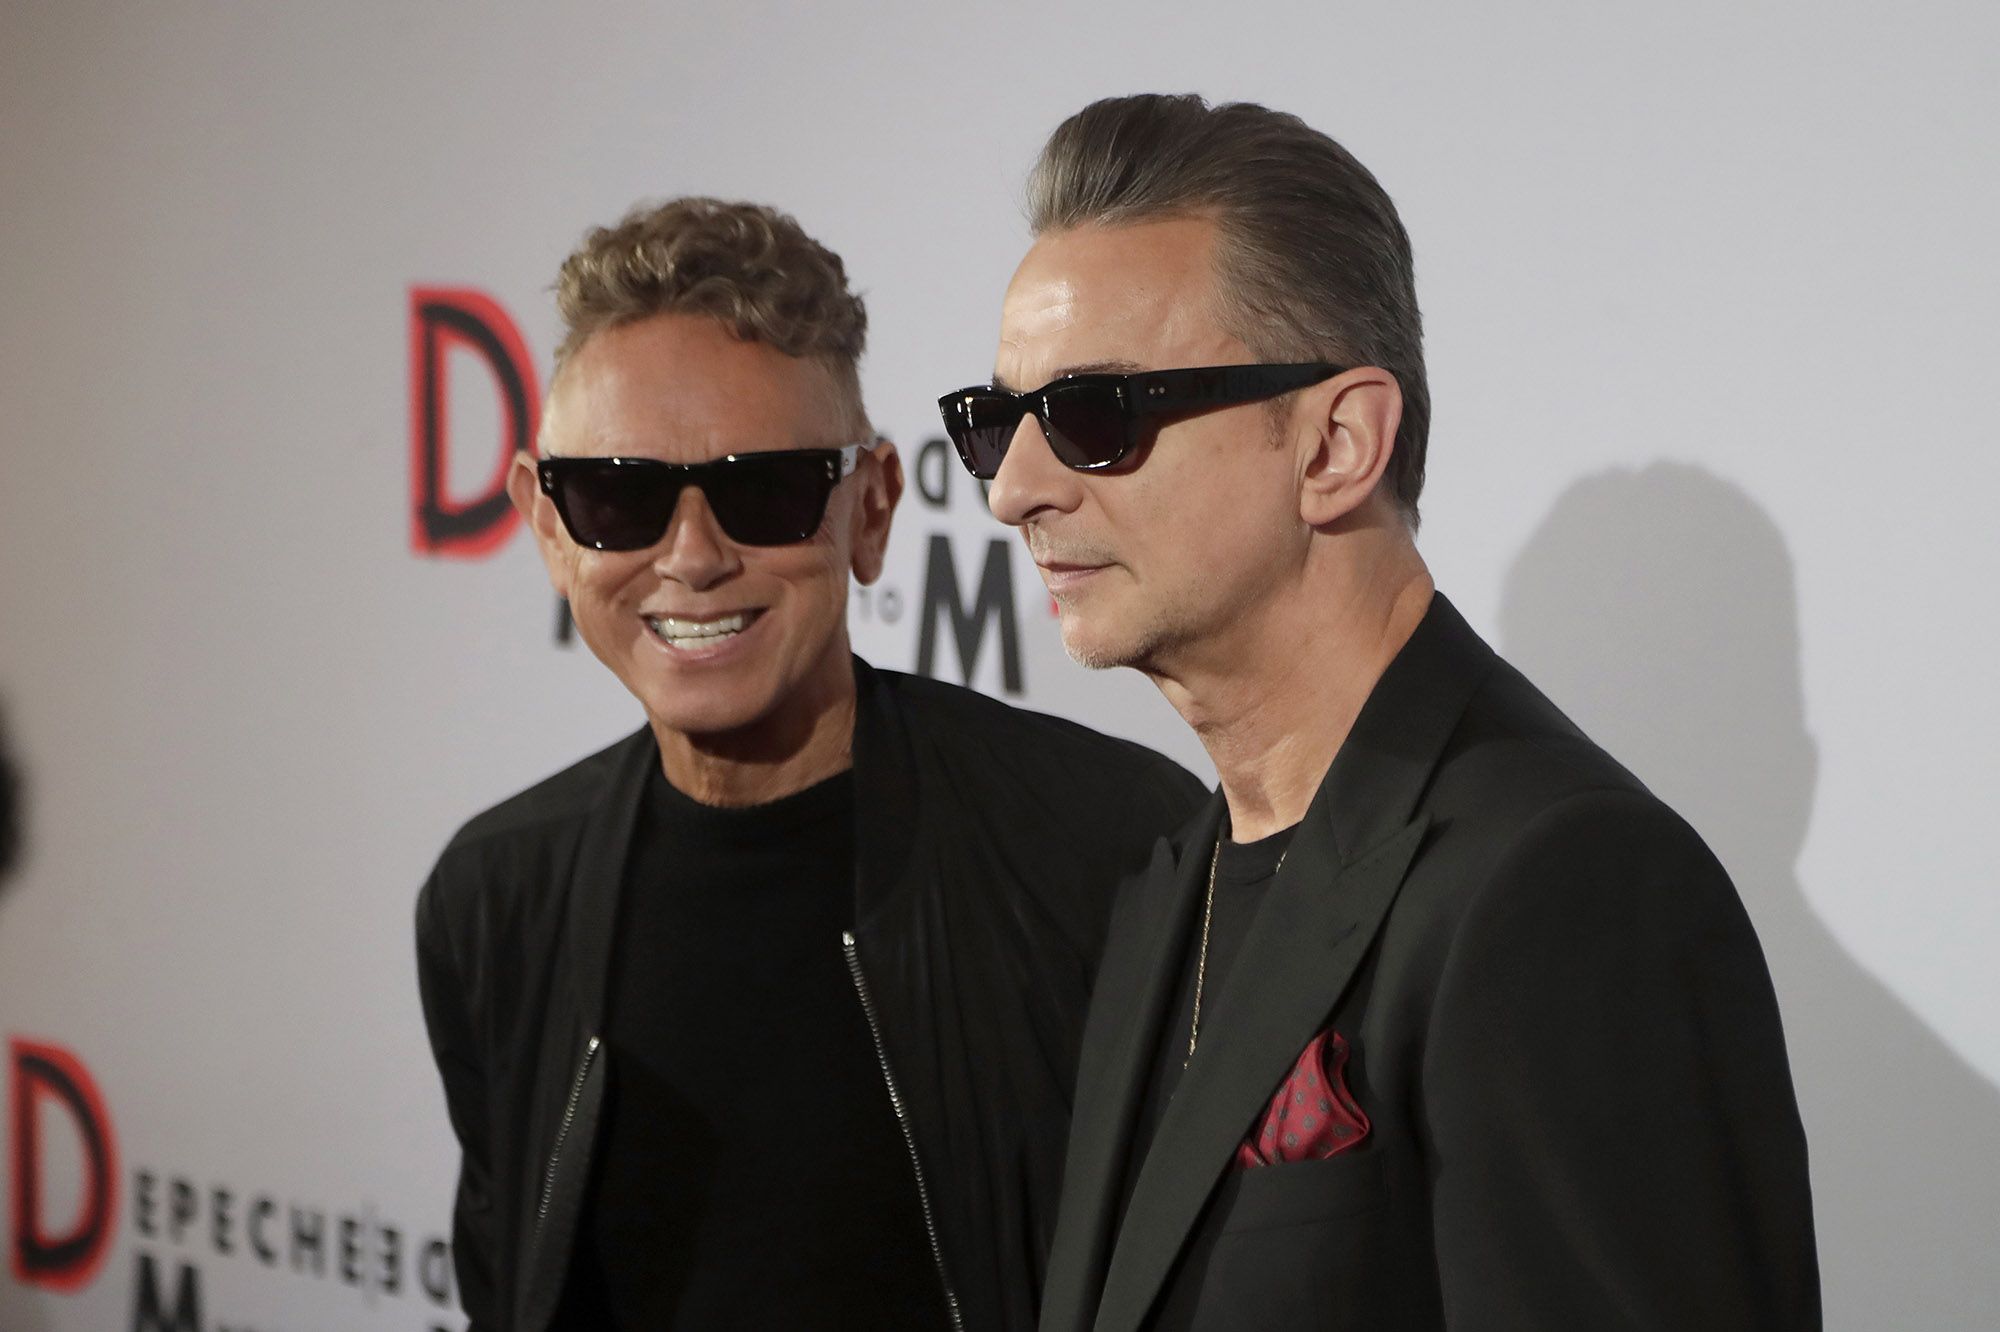 Dave Gahan tells us about the new life together